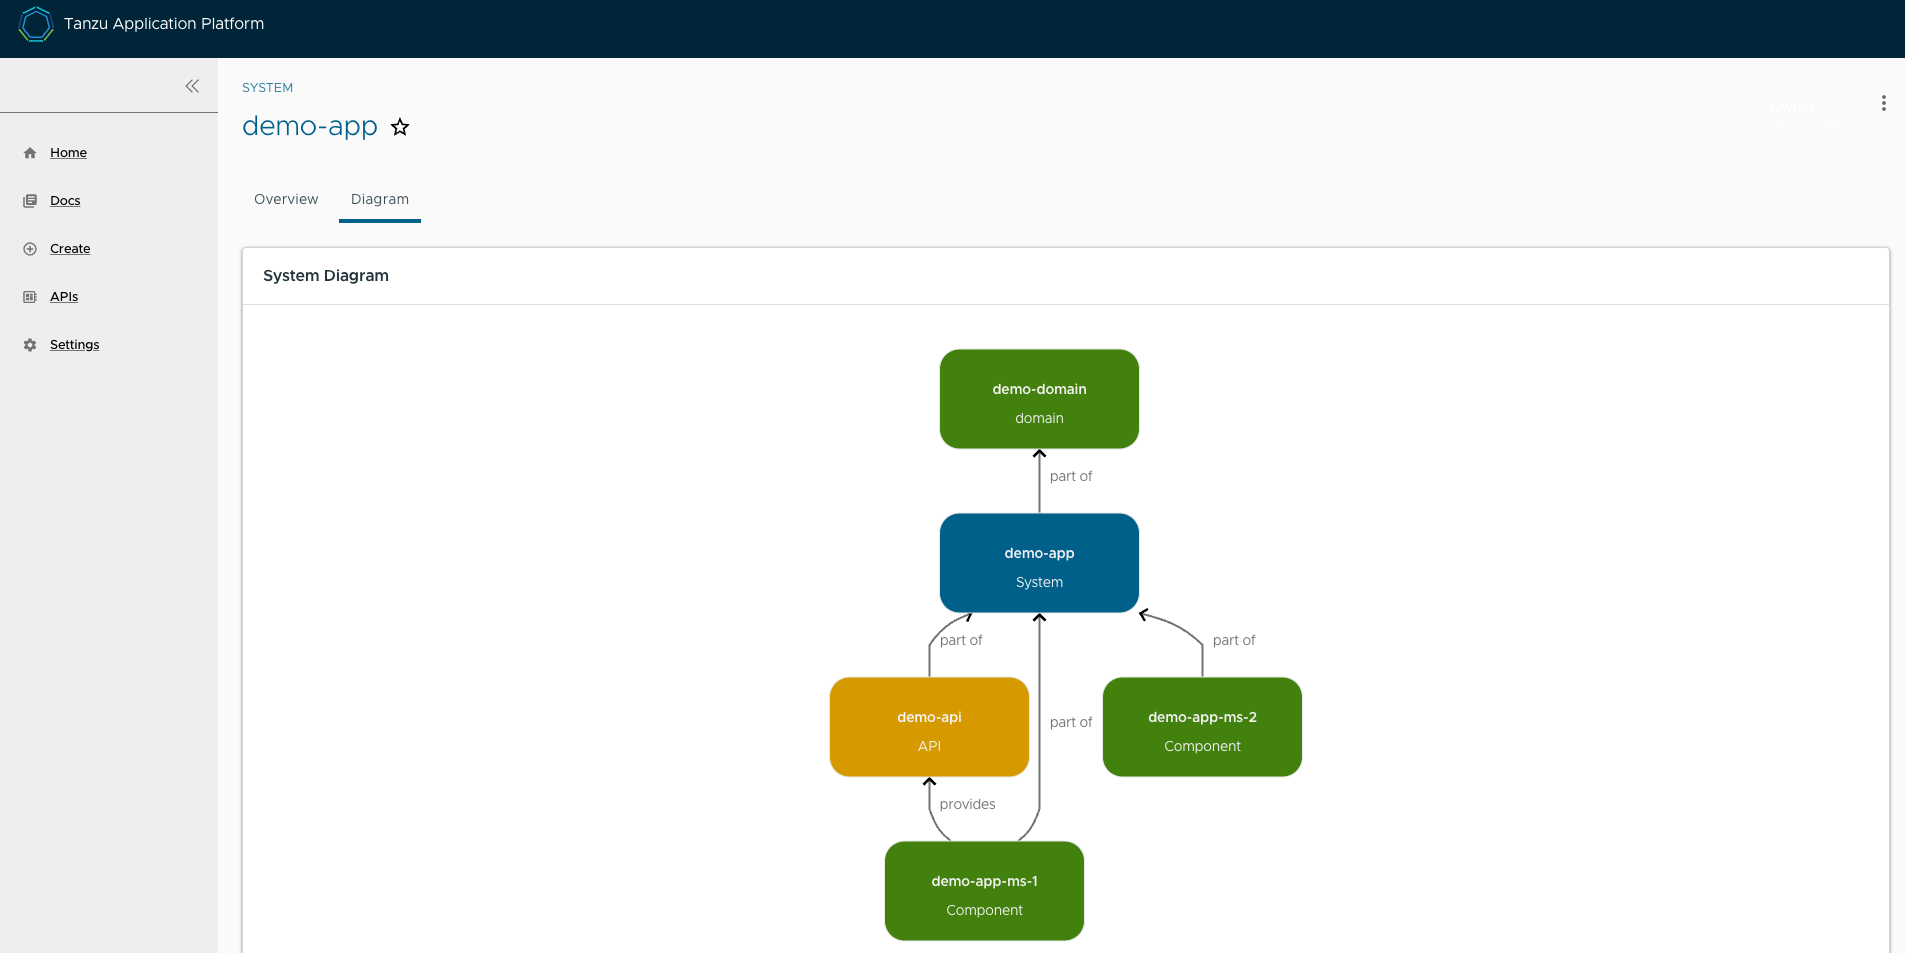 Screenshot of the APIs page. It shows the system diagram for the demo dash app.